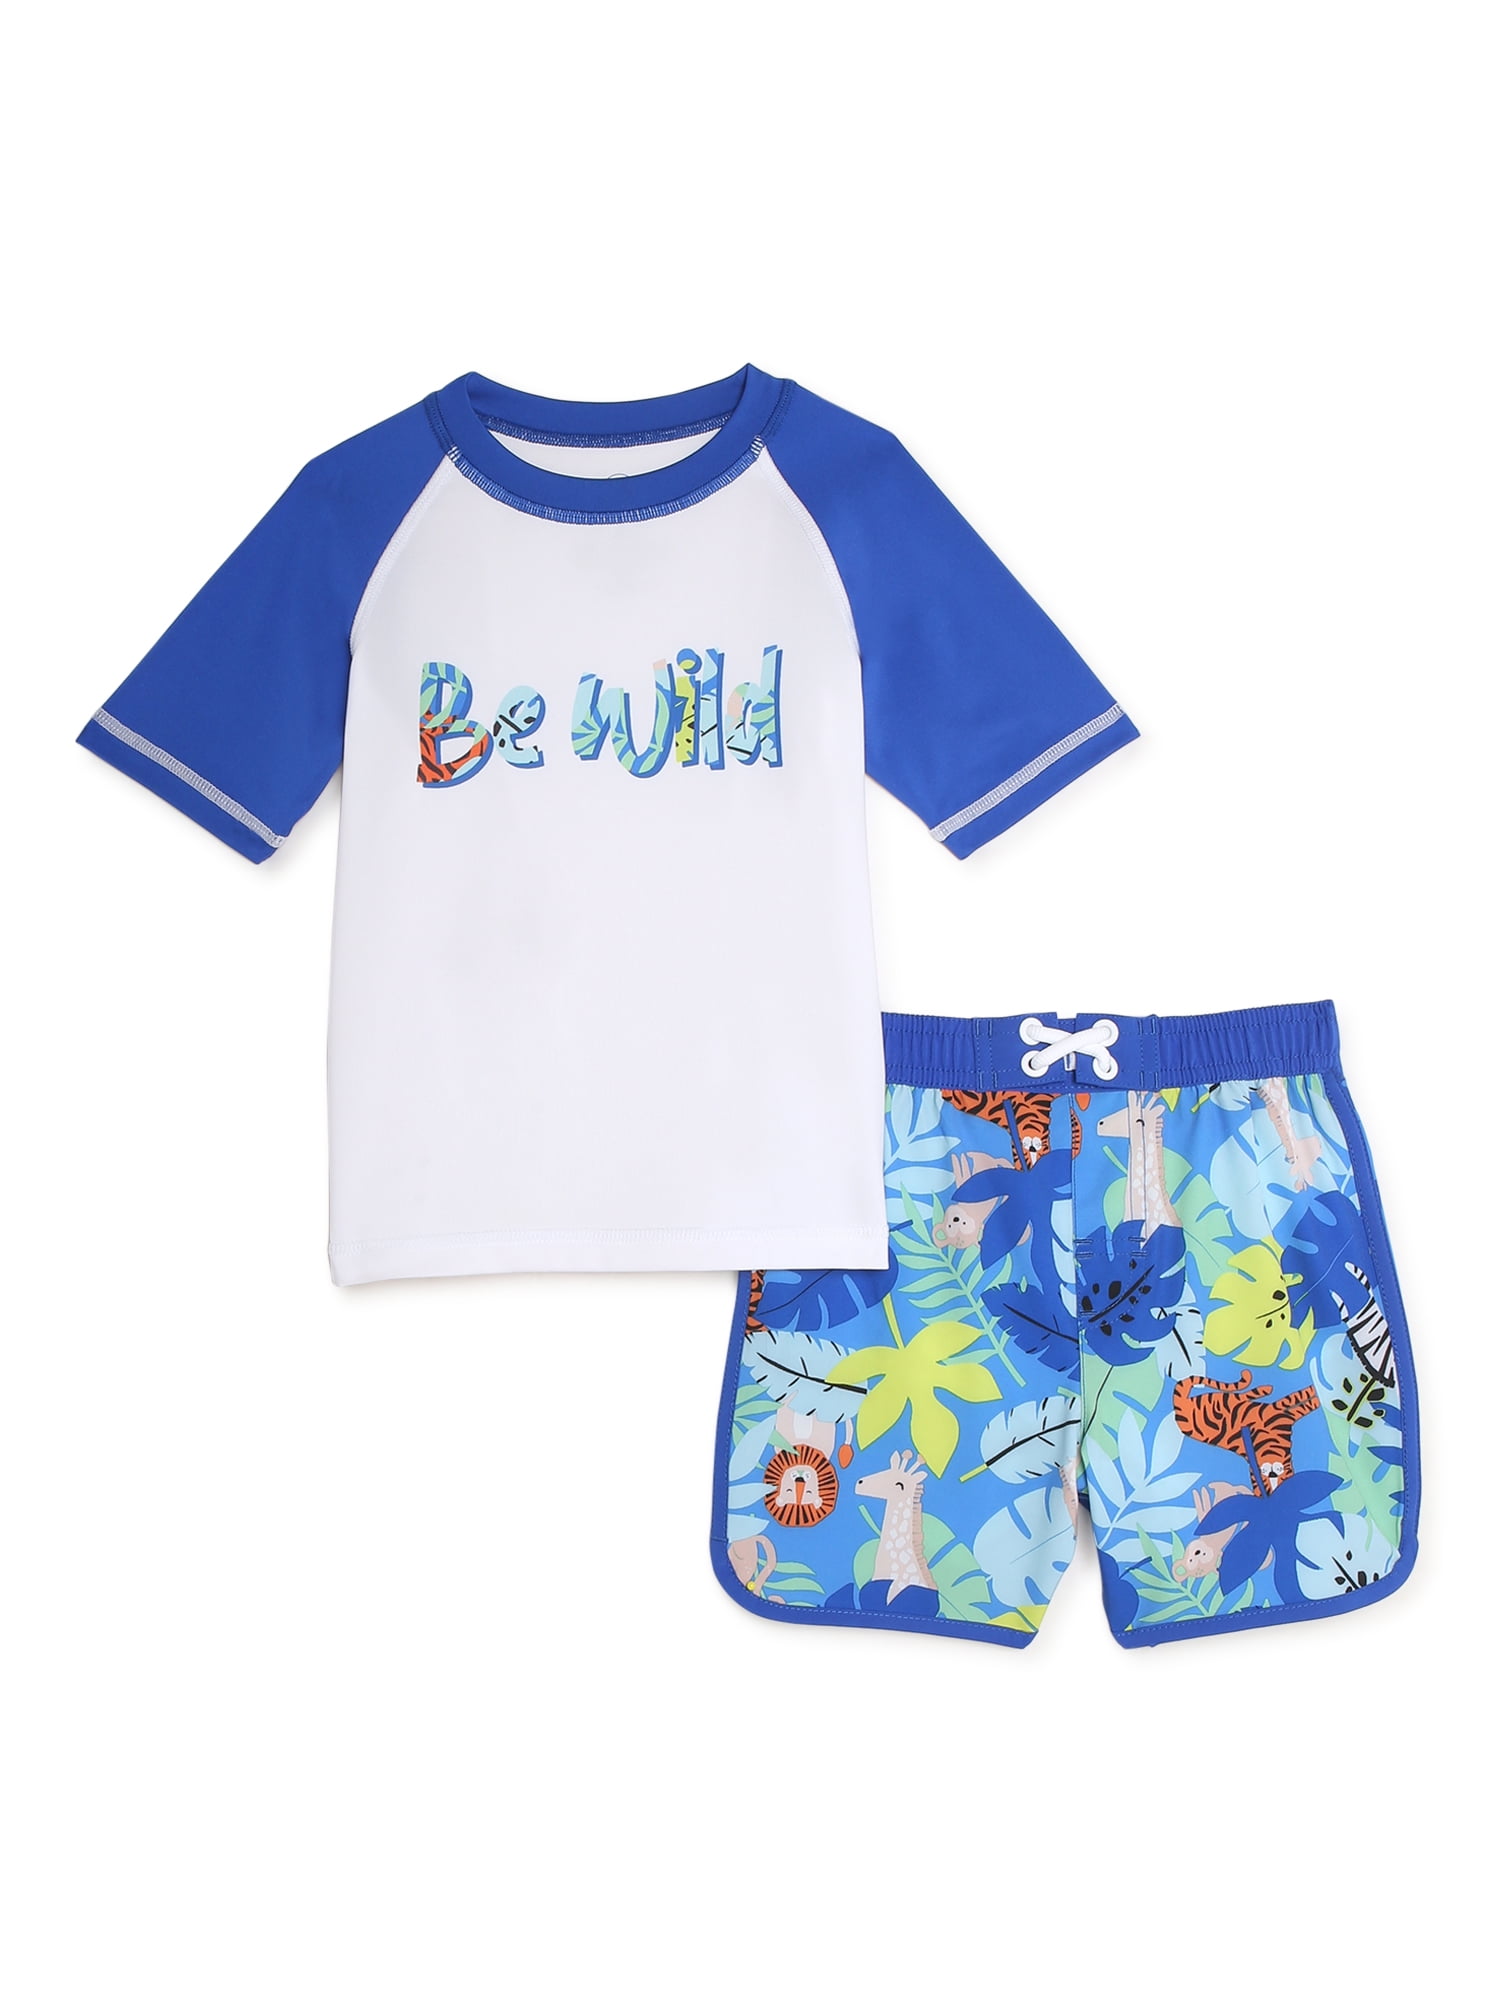 Essentials Toddler and Baby Boys' Long-Sleeve Rashguard and Trunk Swimsuit Sets 